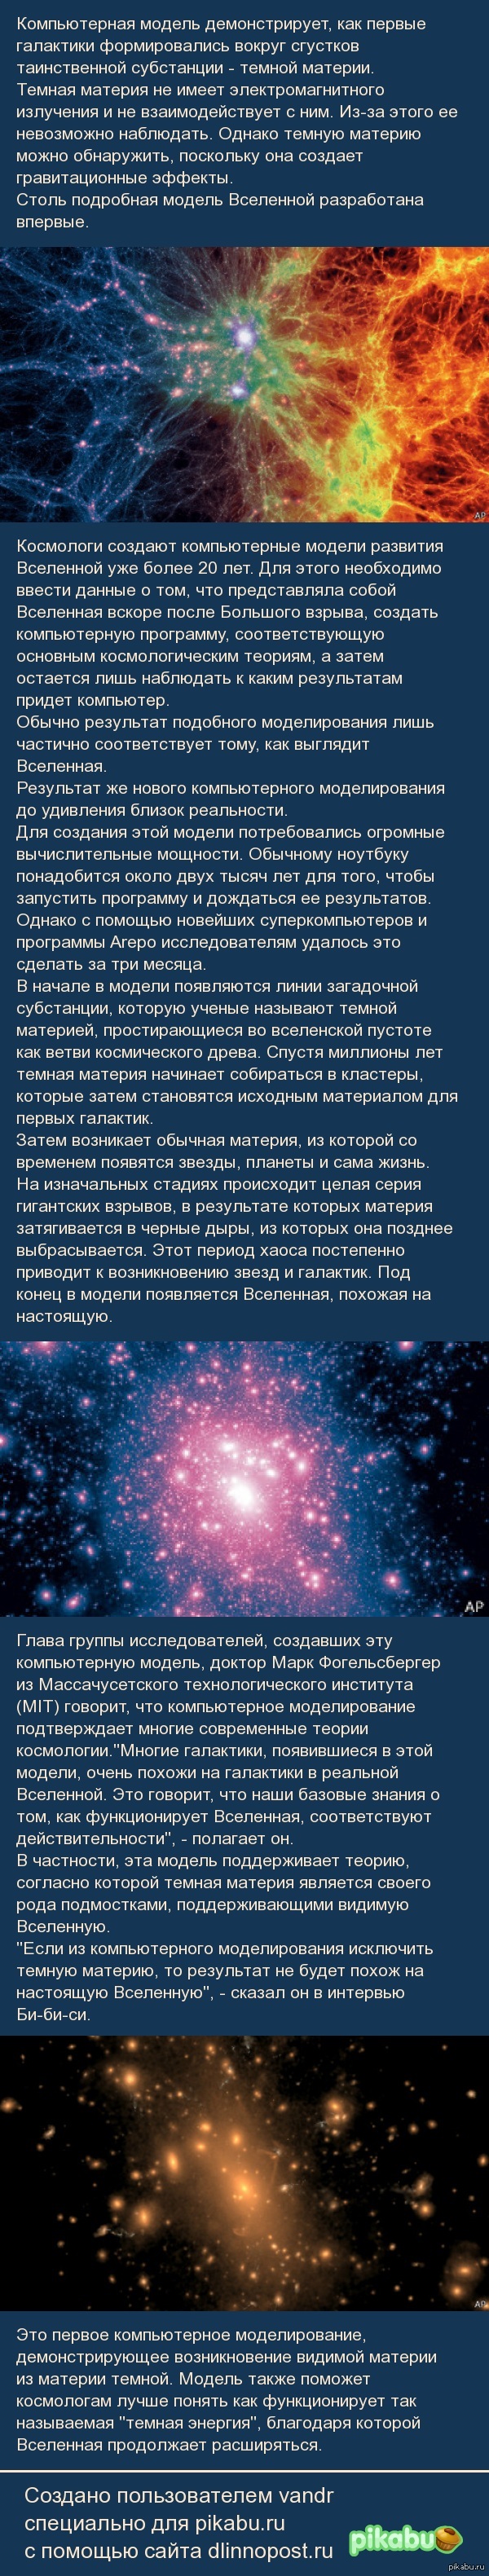               .  : http://www.bbc.co.uk/russian/science/2014/05/140507_new_universe_computer_model.shtml